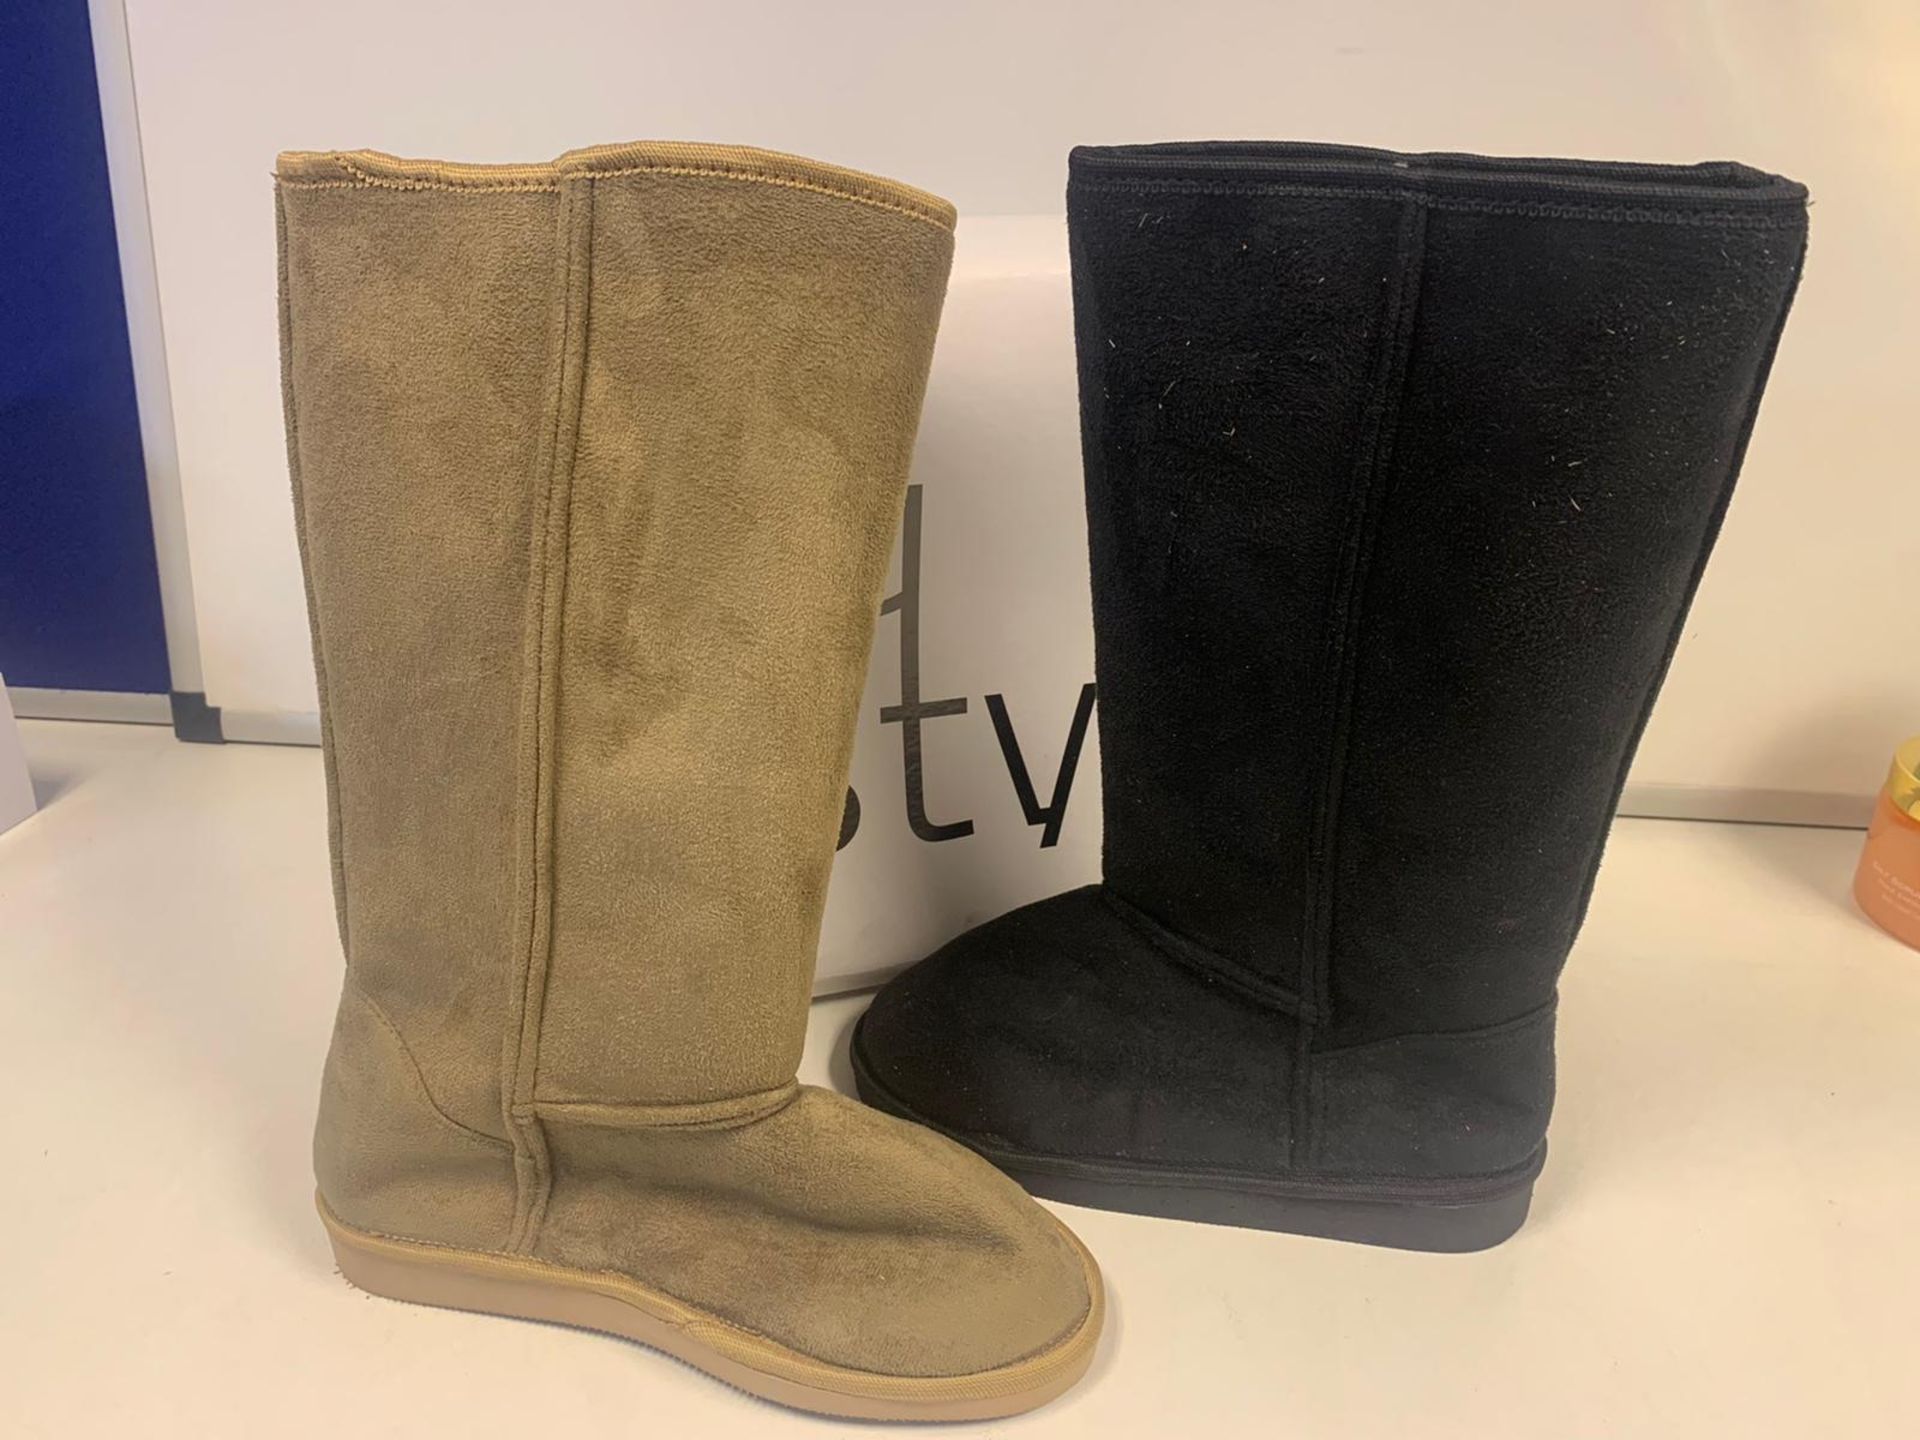 20 X BRAND NEW BOXED EQ STYLE WINTER BOOTS CAMEL AND BLACK SIZES 3 AND 5 IN 2 BOXES